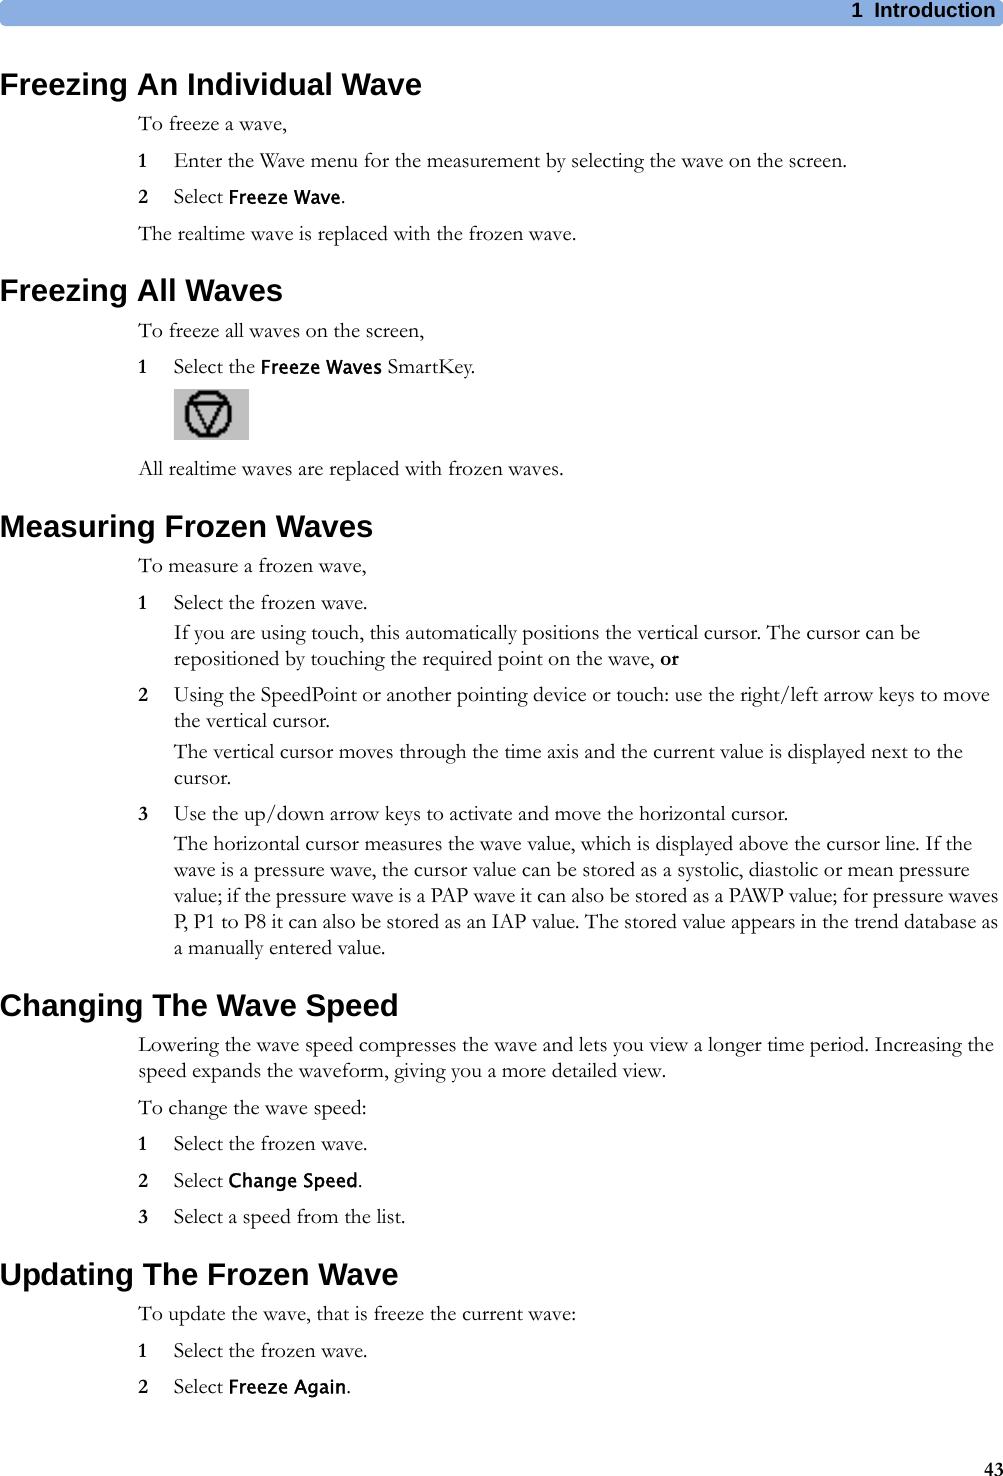 1 Introduction43Freezing An Individual WaveTo freeze a wave,1Enter the Wave menu for the measurement by selecting the wave on the screen.2Select Freeze Wave.The realtime wave is replaced with the frozen wave.Freezing All WavesTo freeze all waves on the screen,1Select the Freeze Waves SmartKey.All realtime waves are replaced with frozen waves.Measuring Frozen WavesTo measure a frozen wave,1Select the frozen wave.If you are using touch, this automatically positions the vertical cursor. The cursor can be repositioned by touching the required point on the wave, or2Using the SpeedPoint or another pointing device or touch: use the right/left arrow keys to move the vertical cursor.The vertical cursor moves through the time axis and the current value is displayed next to the cursor.3Use the up/down arrow keys to activate and move the horizontal cursor.The horizontal cursor measures the wave value, which is displayed above the cursor line. If the wave is a pressure wave, the cursor value can be stored as a systolic, diastolic or mean pressure value; if the pressure wave is a PAP wave it can also be stored as a PAWP value; for pressure waves P, P1 to P8 it can also be stored as an IAP value. The stored value appears in the trend database as a manually entered value.Changing The Wave SpeedLowering the wave speed compresses the wave and lets you view a longer time period. Increasing the speed expands the waveform, giving you a more detailed view.To change the wave speed:1Select the frozen wave.2Select Change Speed.3Select a speed from the list.Updating The Frozen WaveTo update the wave, that is freeze the current wave:1Select the frozen wave.2Select Freeze Again.